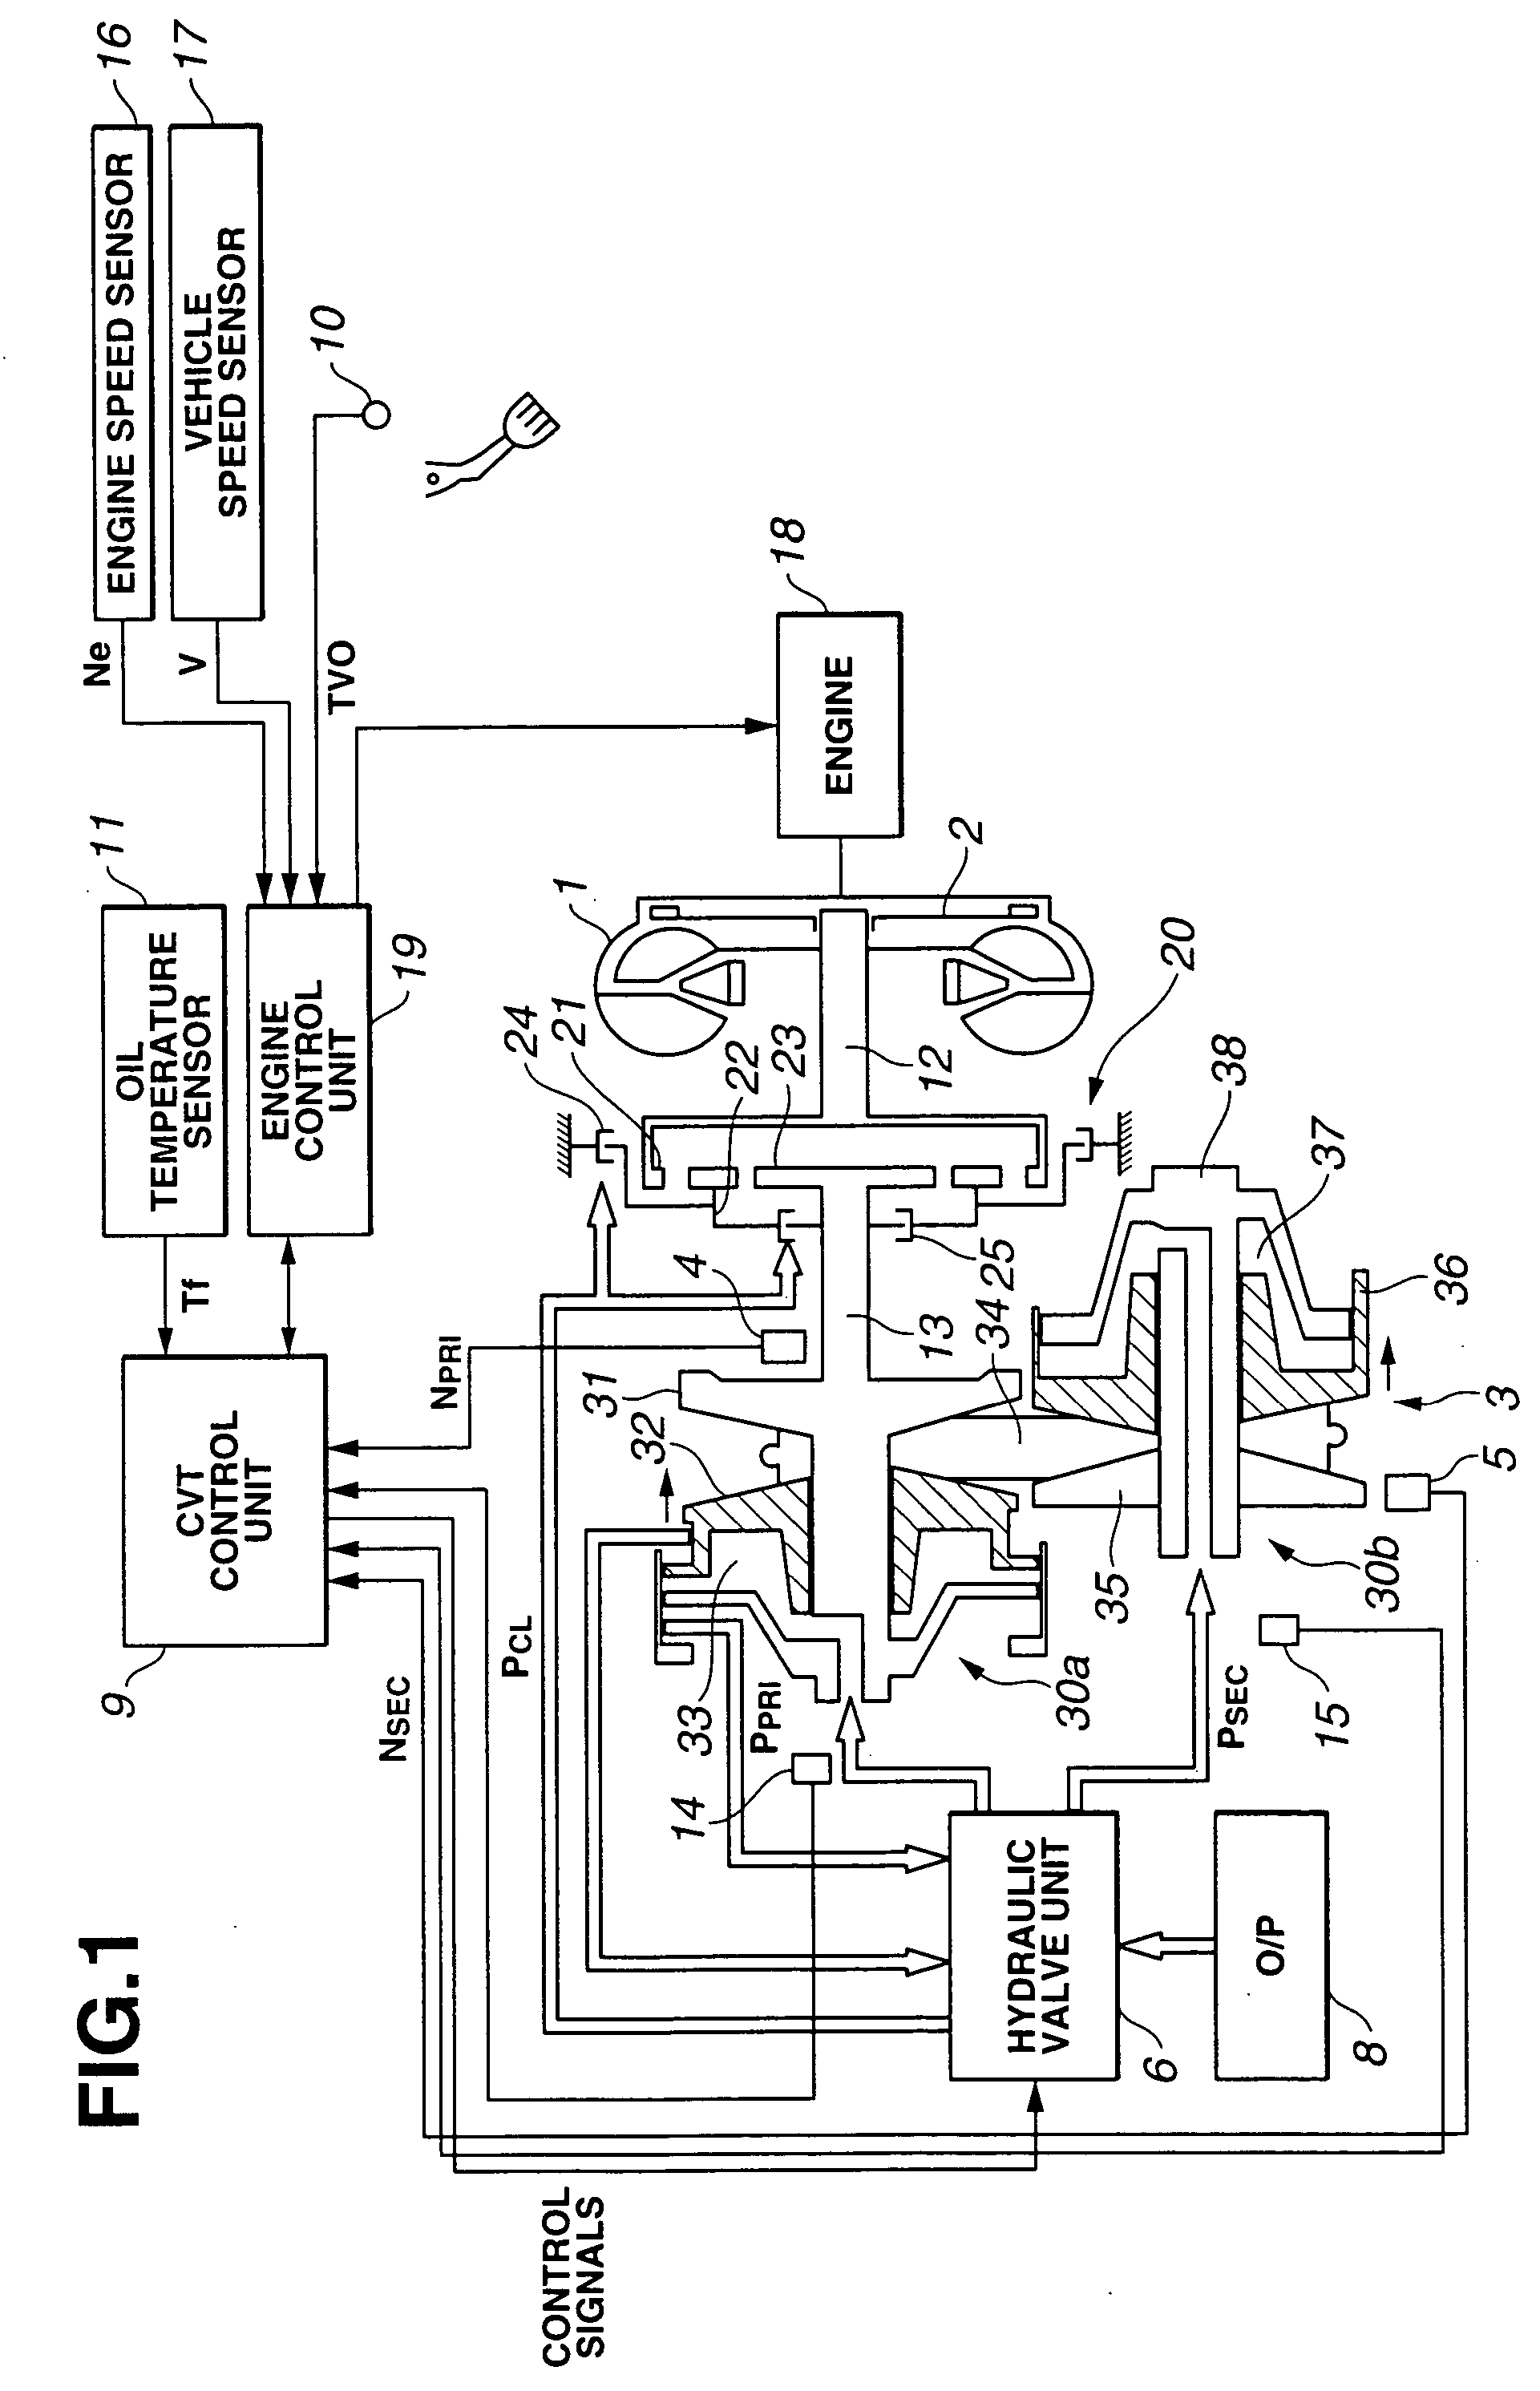 Hydraulic transmission control system and method for vehicle having automatic engine stop/restart function